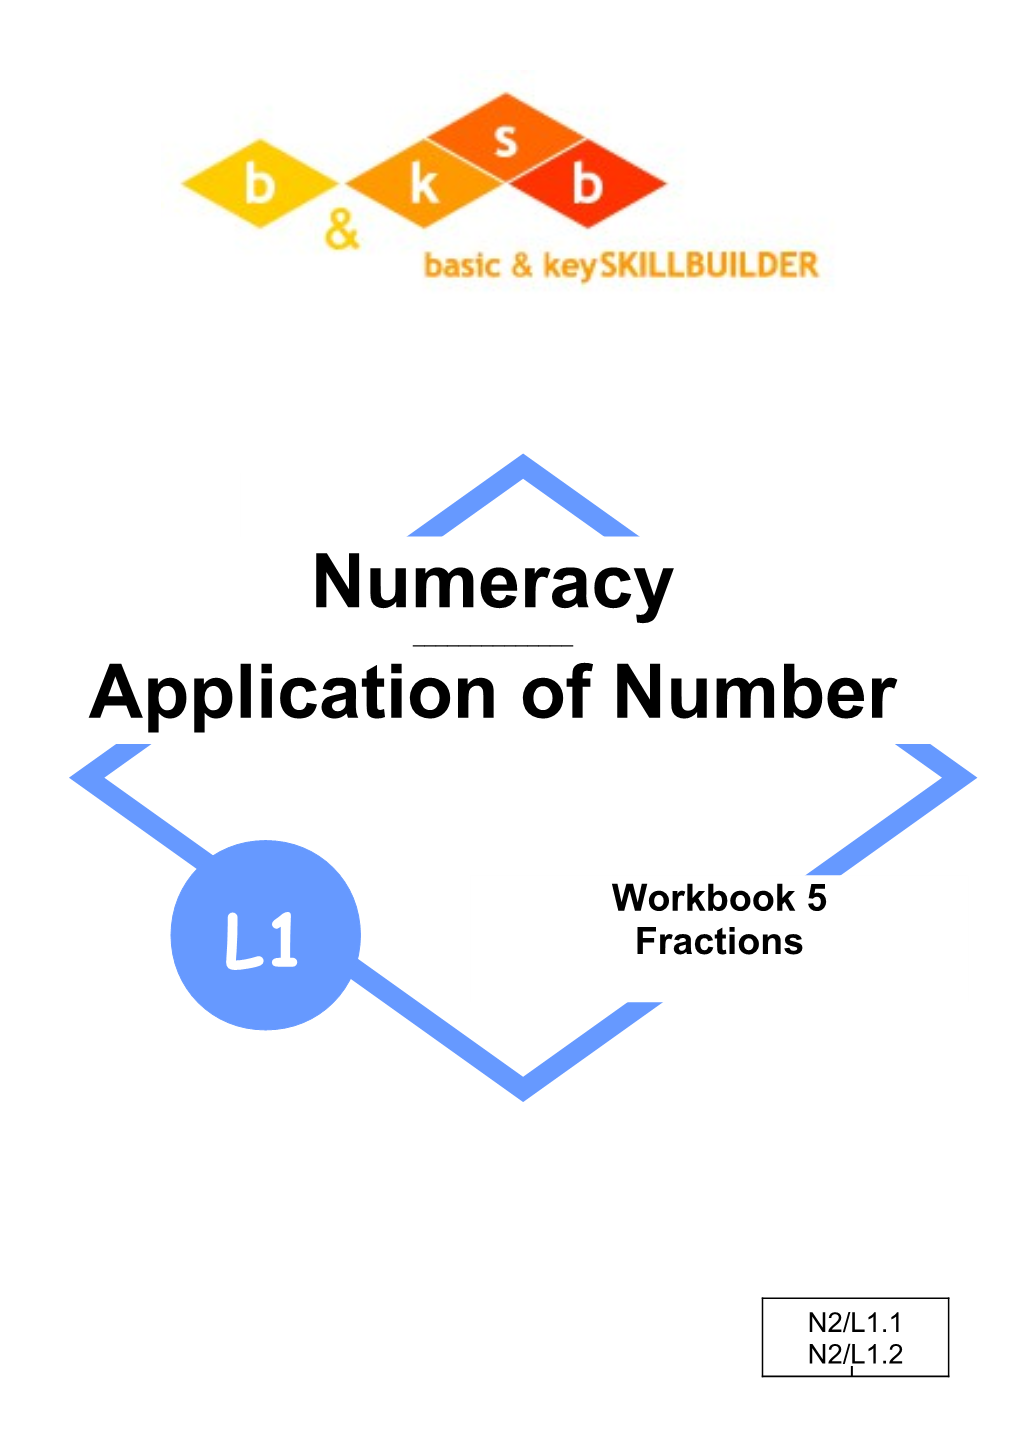 Bksb Level 1 Application of Number / Numeracy